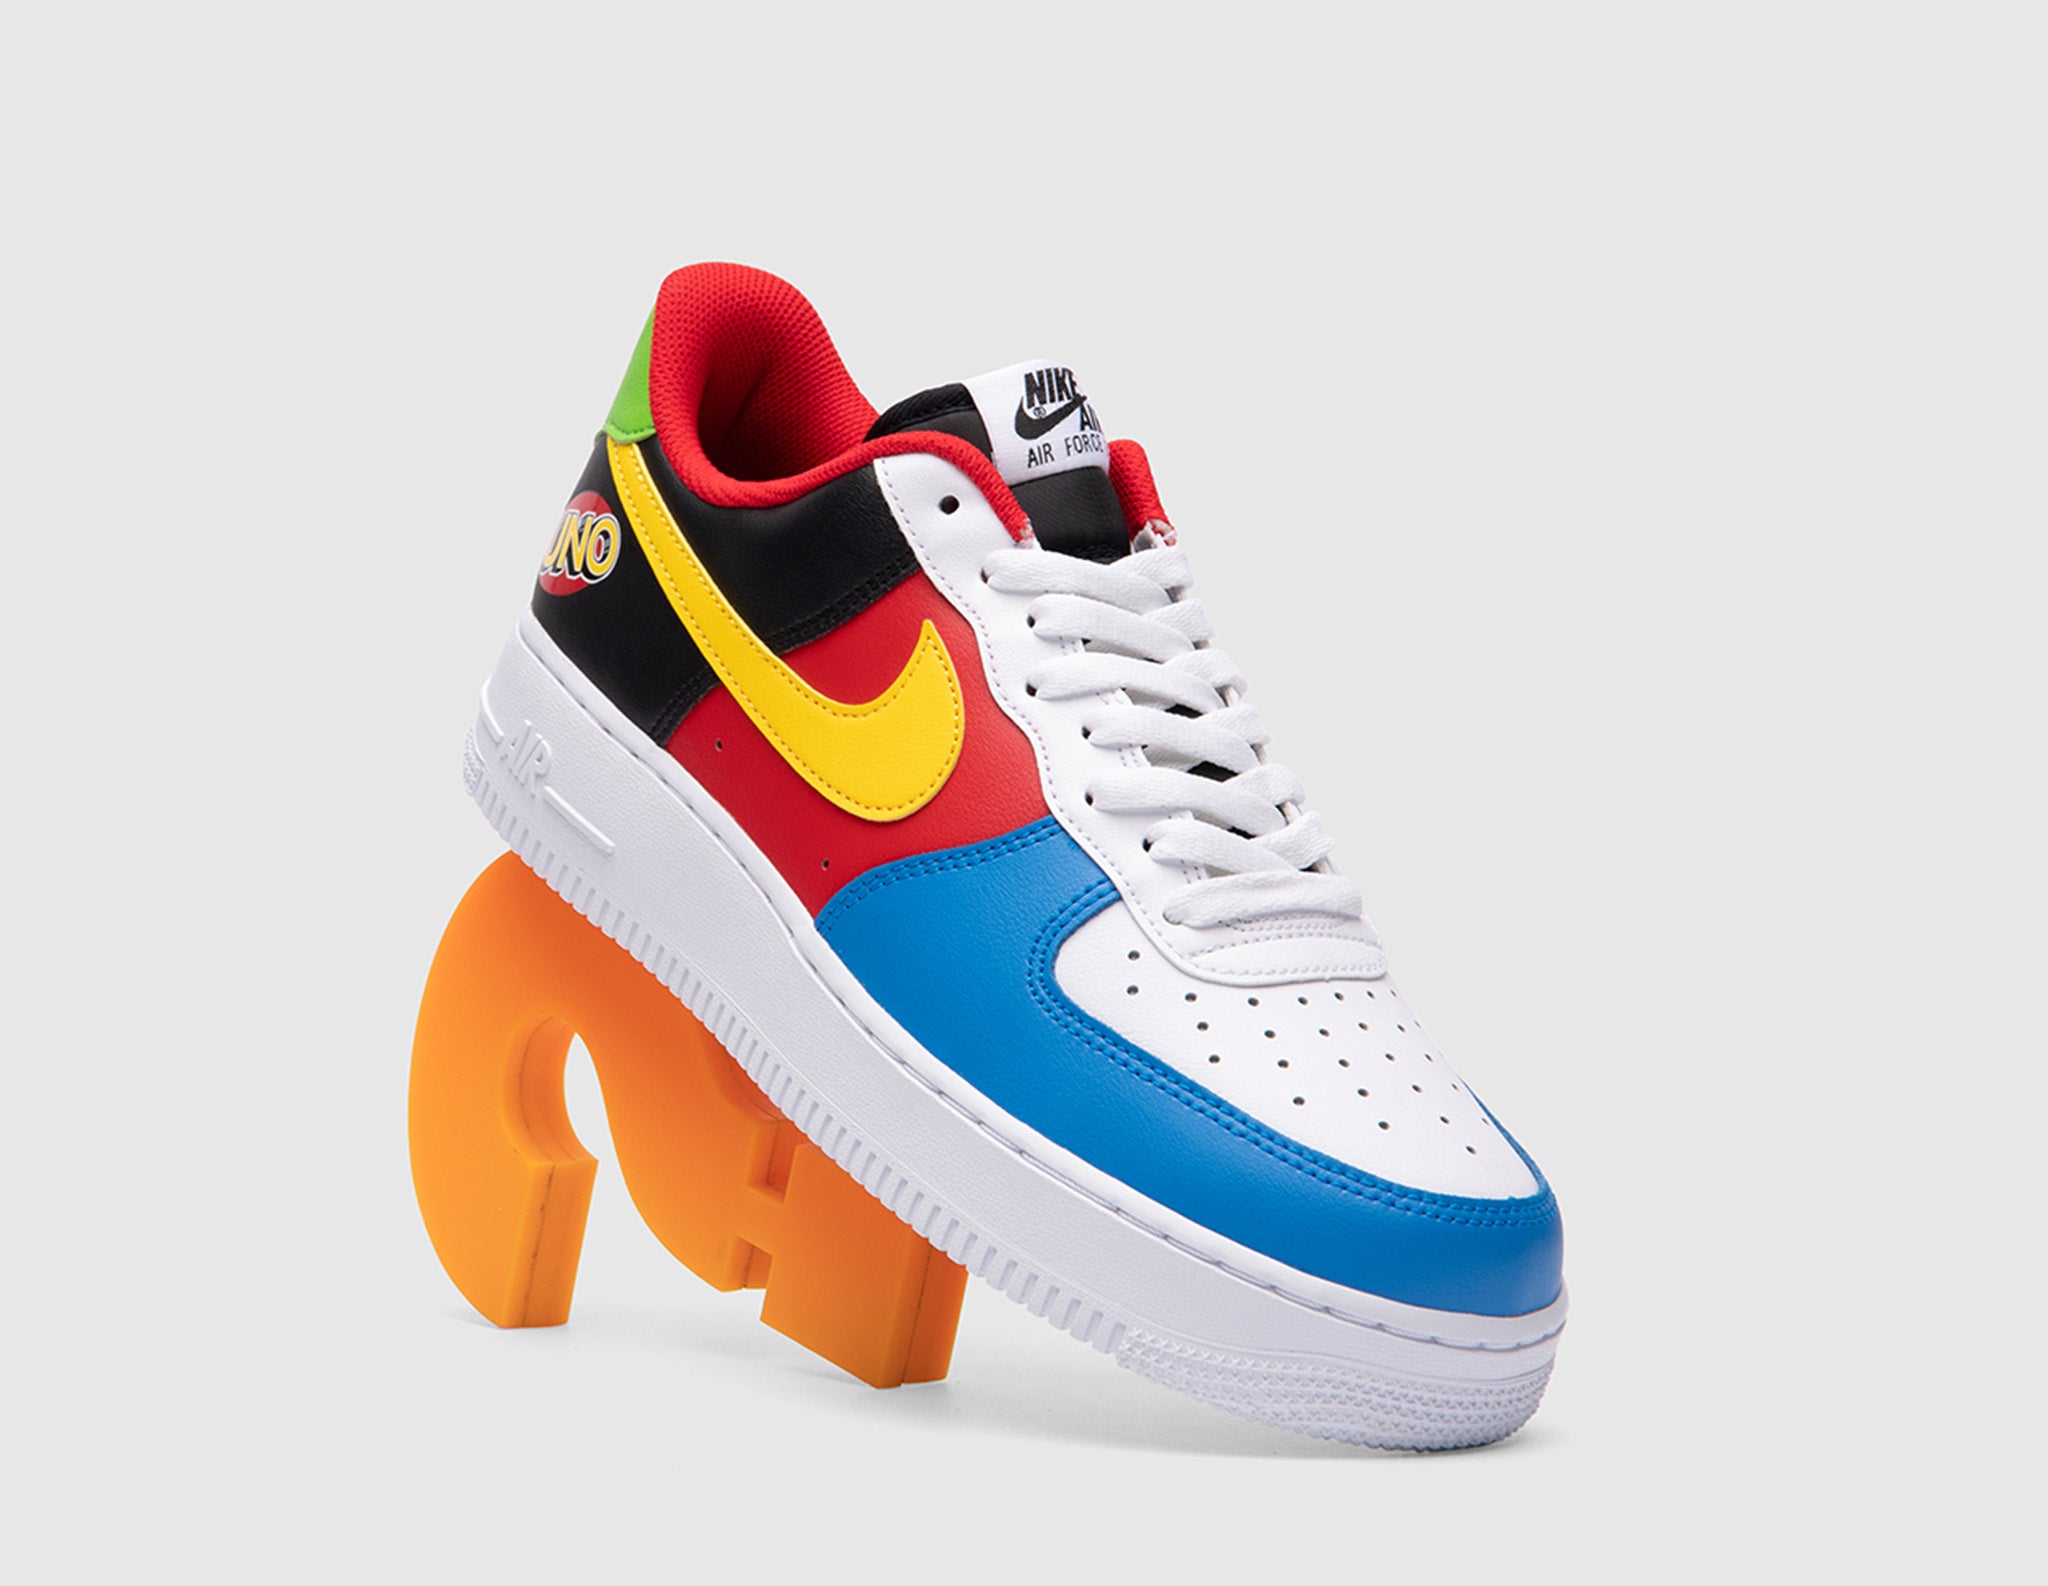 Nike Uno Air Force 1 '07 White / Yellow Zest